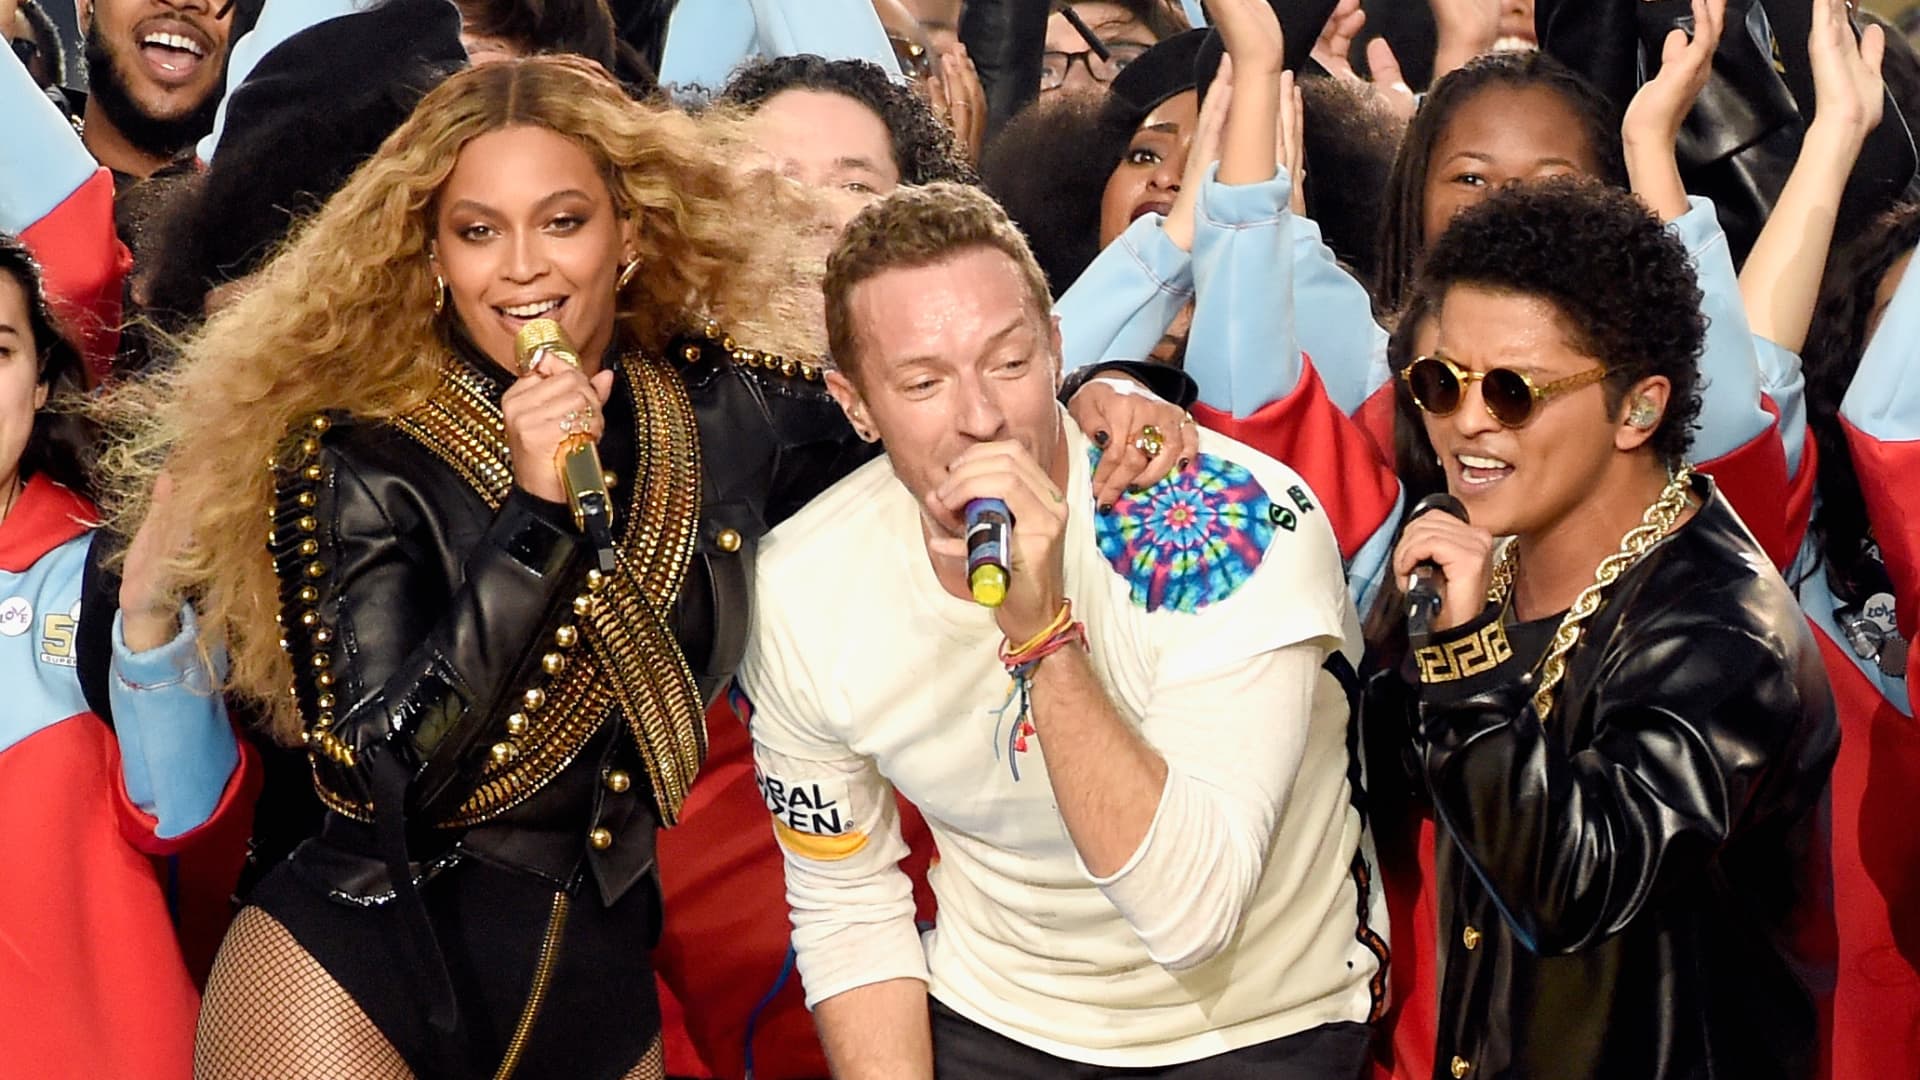 (L-R) Beyonce, Chris Martin of Coldplay and Bruno Mars perform onstage during the Pepsi Super Bowl 50 Halftime Show at Levi's Stadium on February 7, 2016 in Santa Clara, California.(Photo by Kevin Mazur/WireImage)